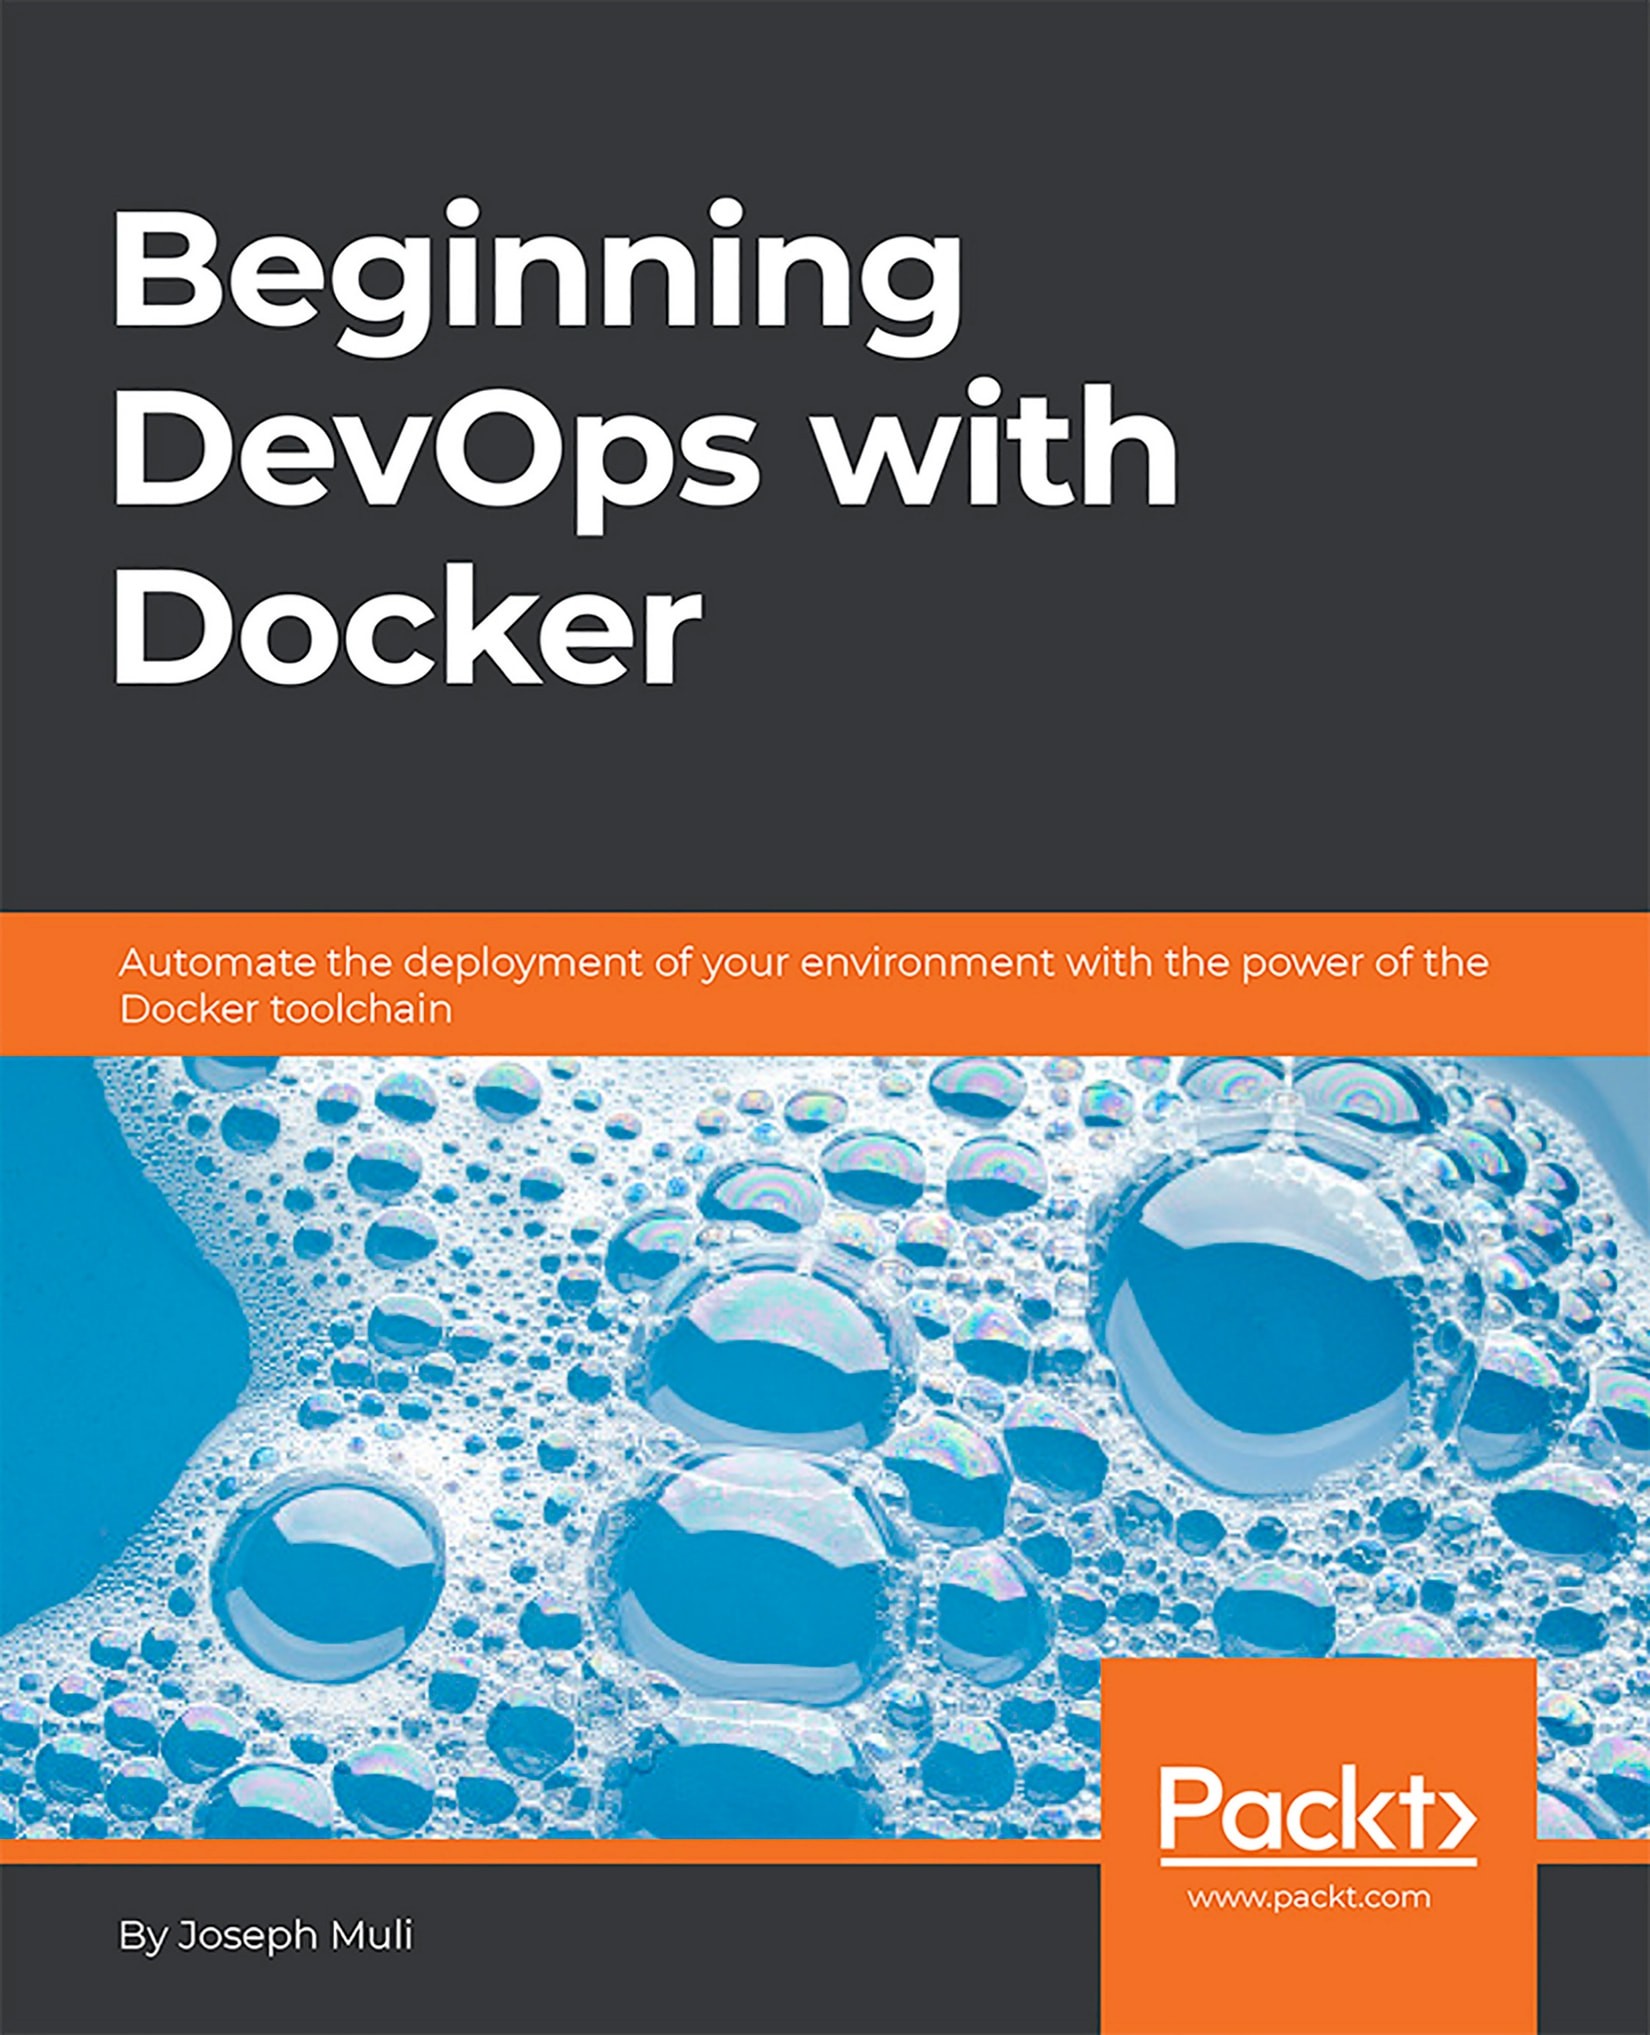 Beginning DevOps With Docker: Automate the Deployment of Your Environment With the Power of the Docker Toolchain